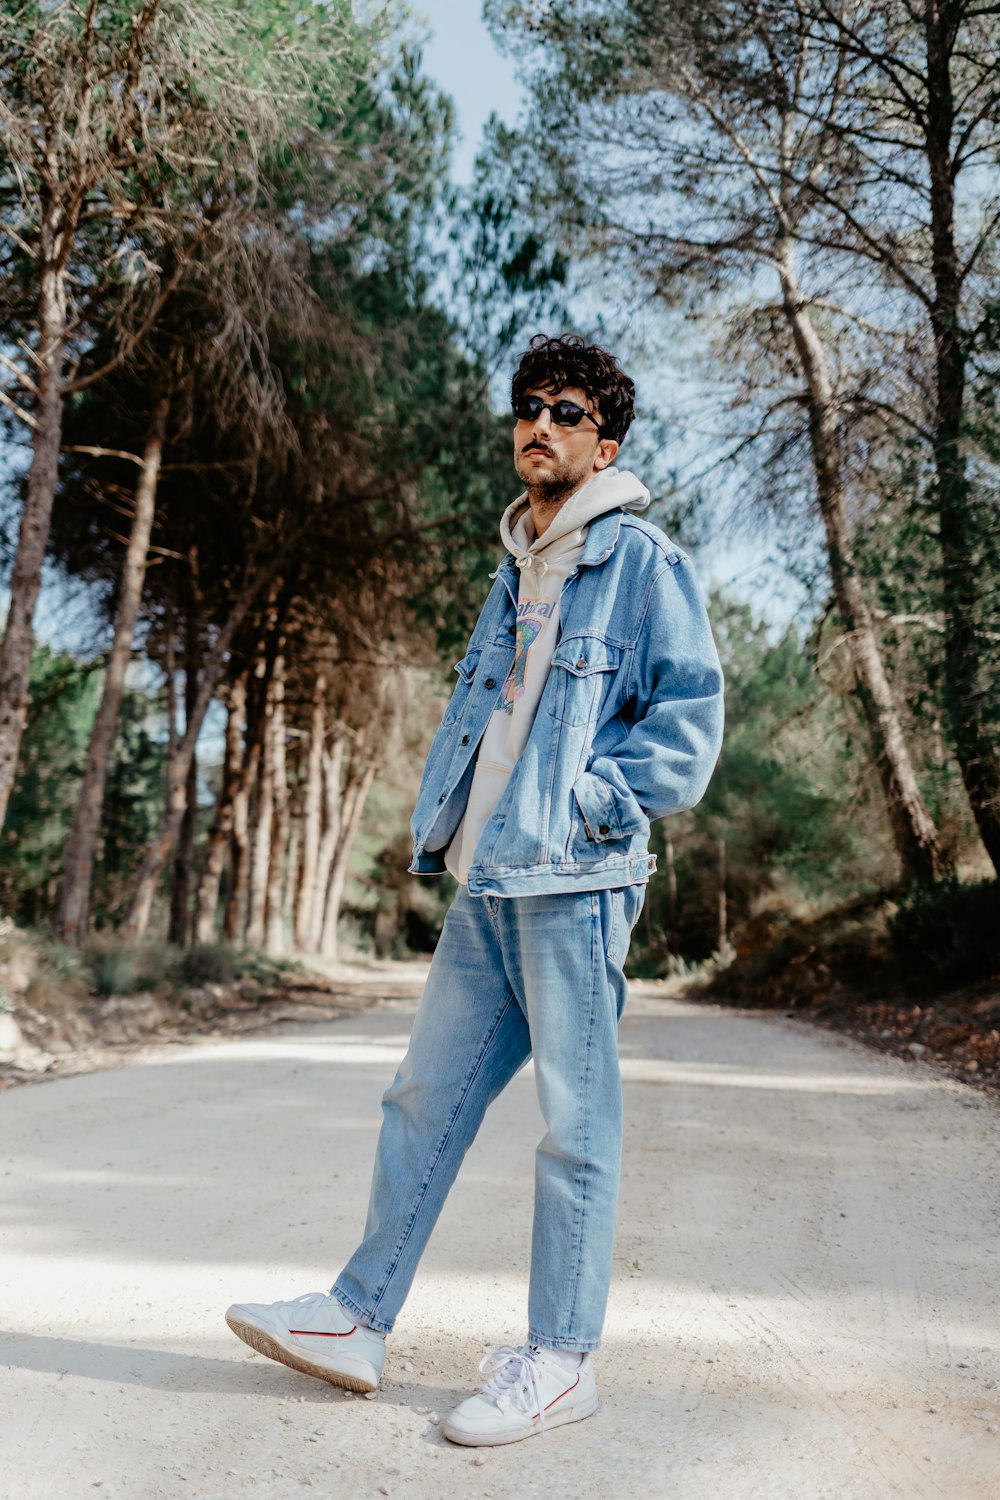 A man standing on a road wearing a denim jacket and jeans photo – Free Art  Image on Unsplash